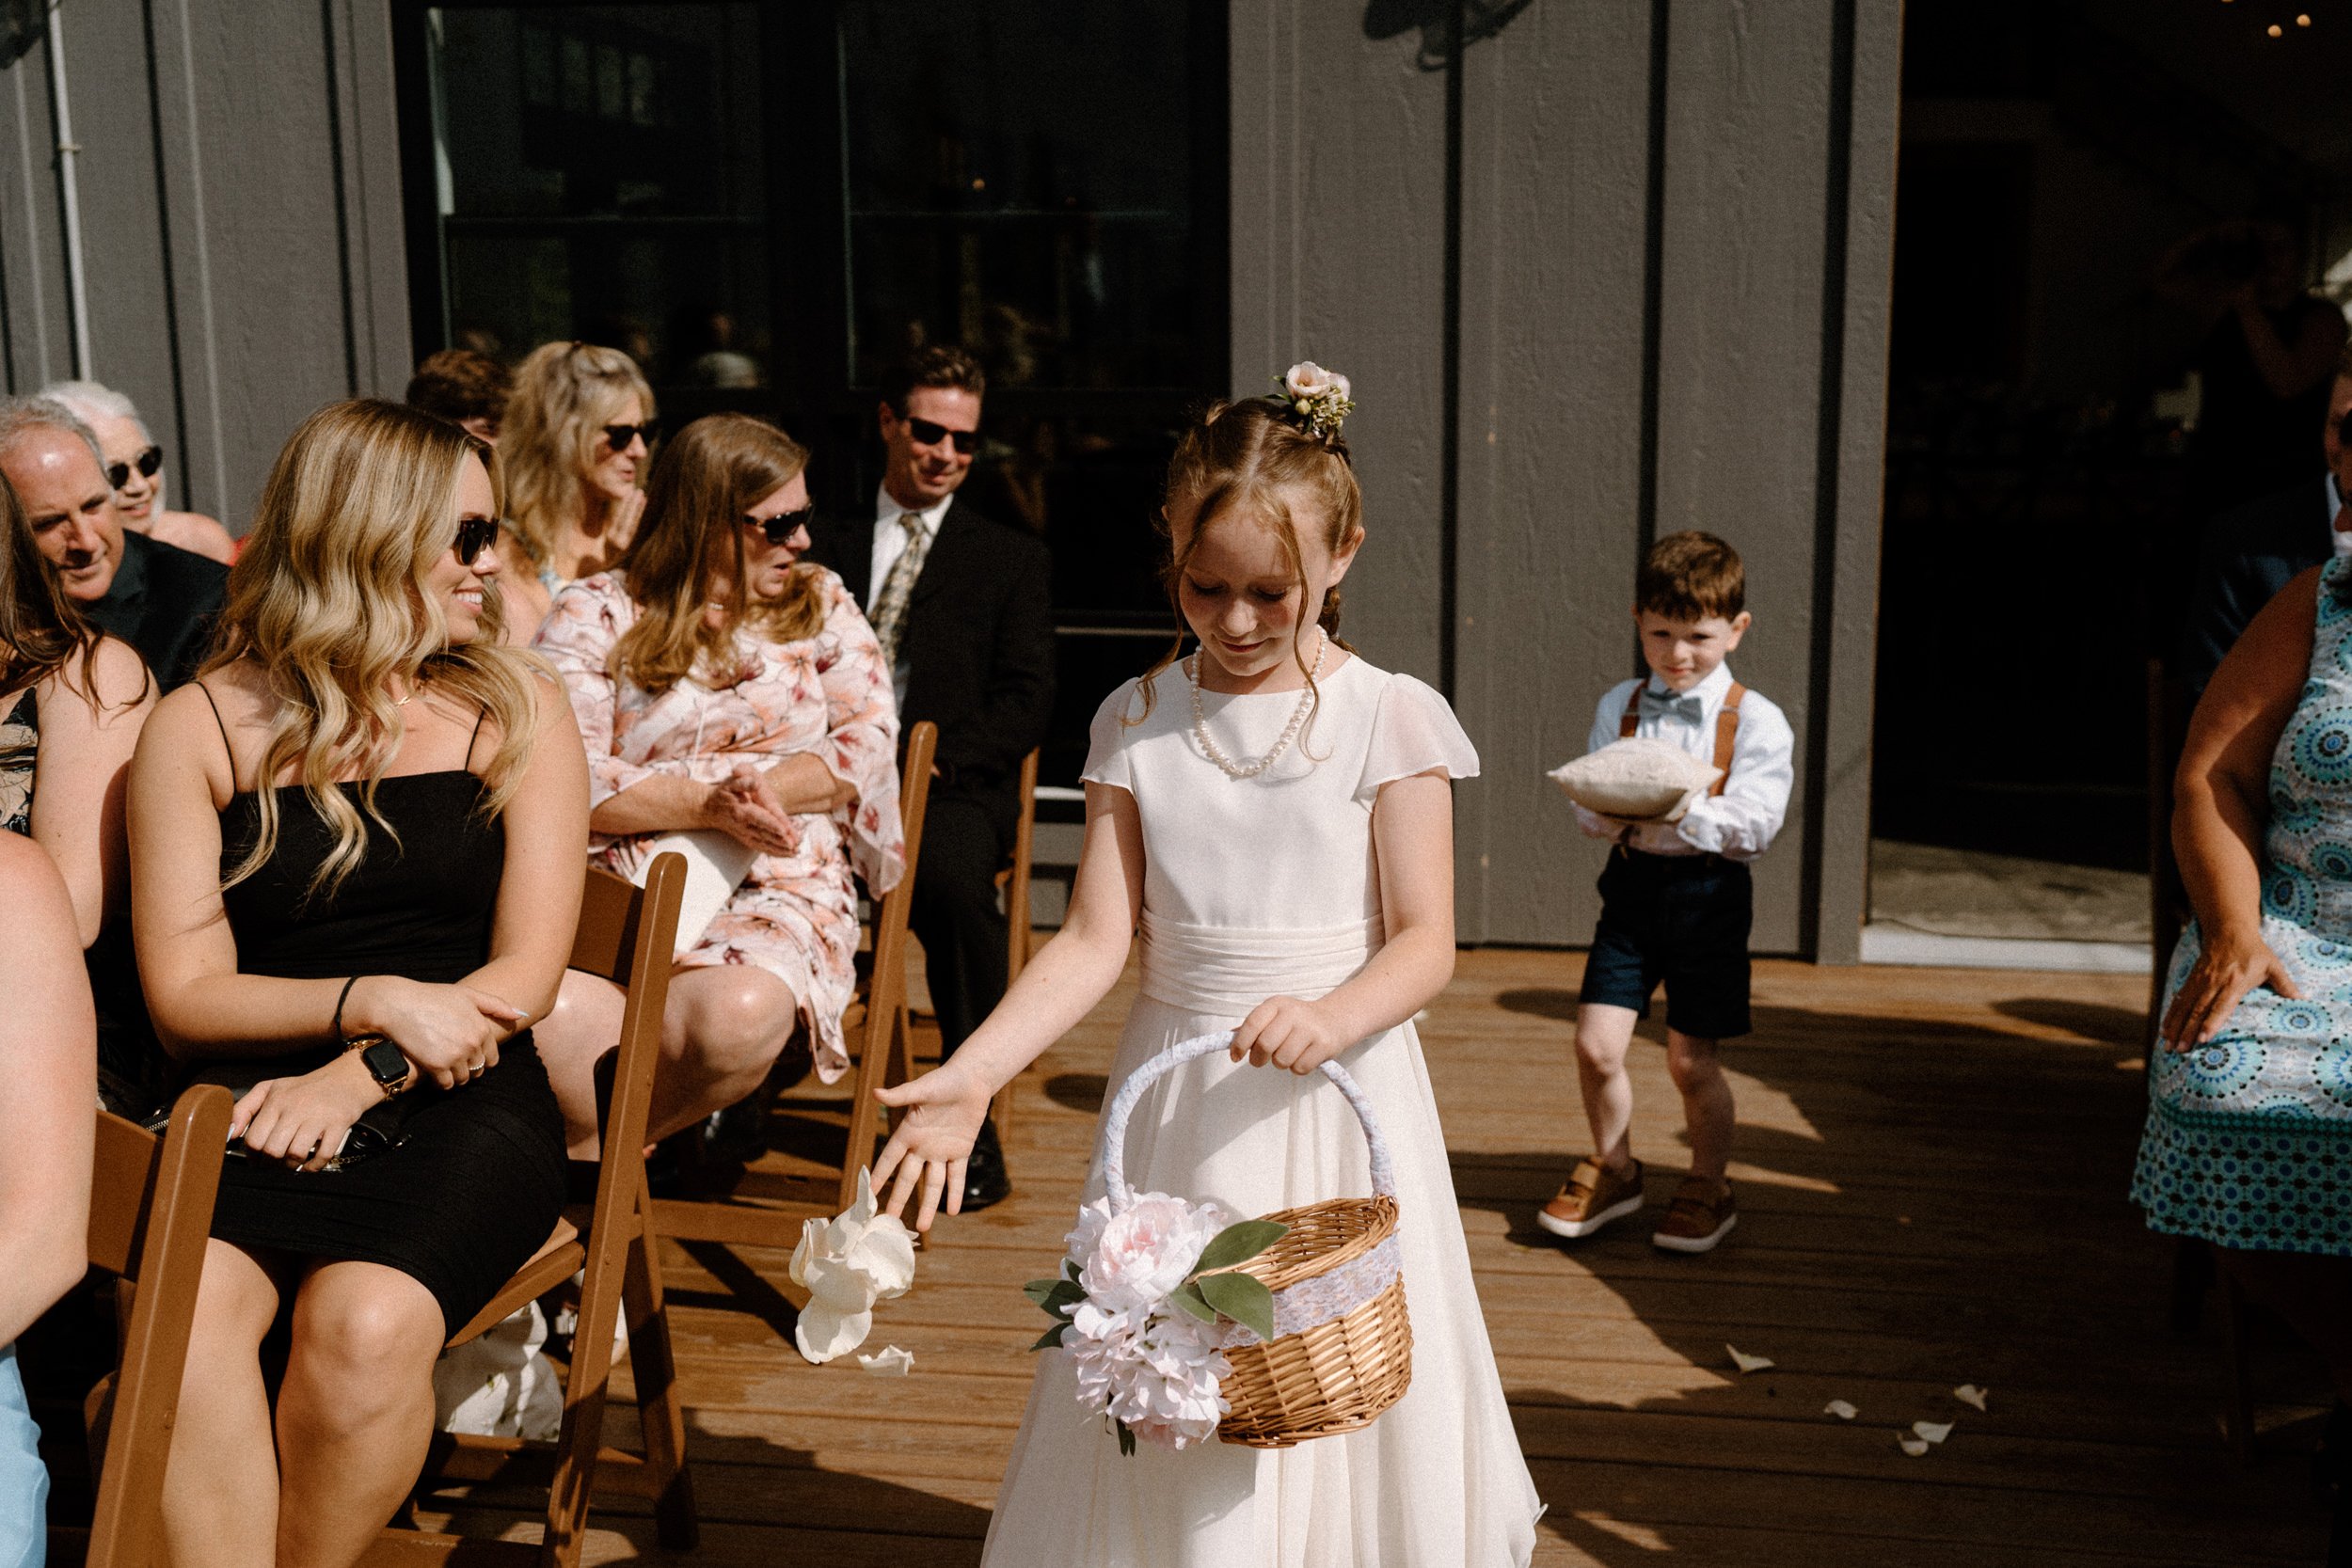 A flower girl tosses petals as she walks down the aisle